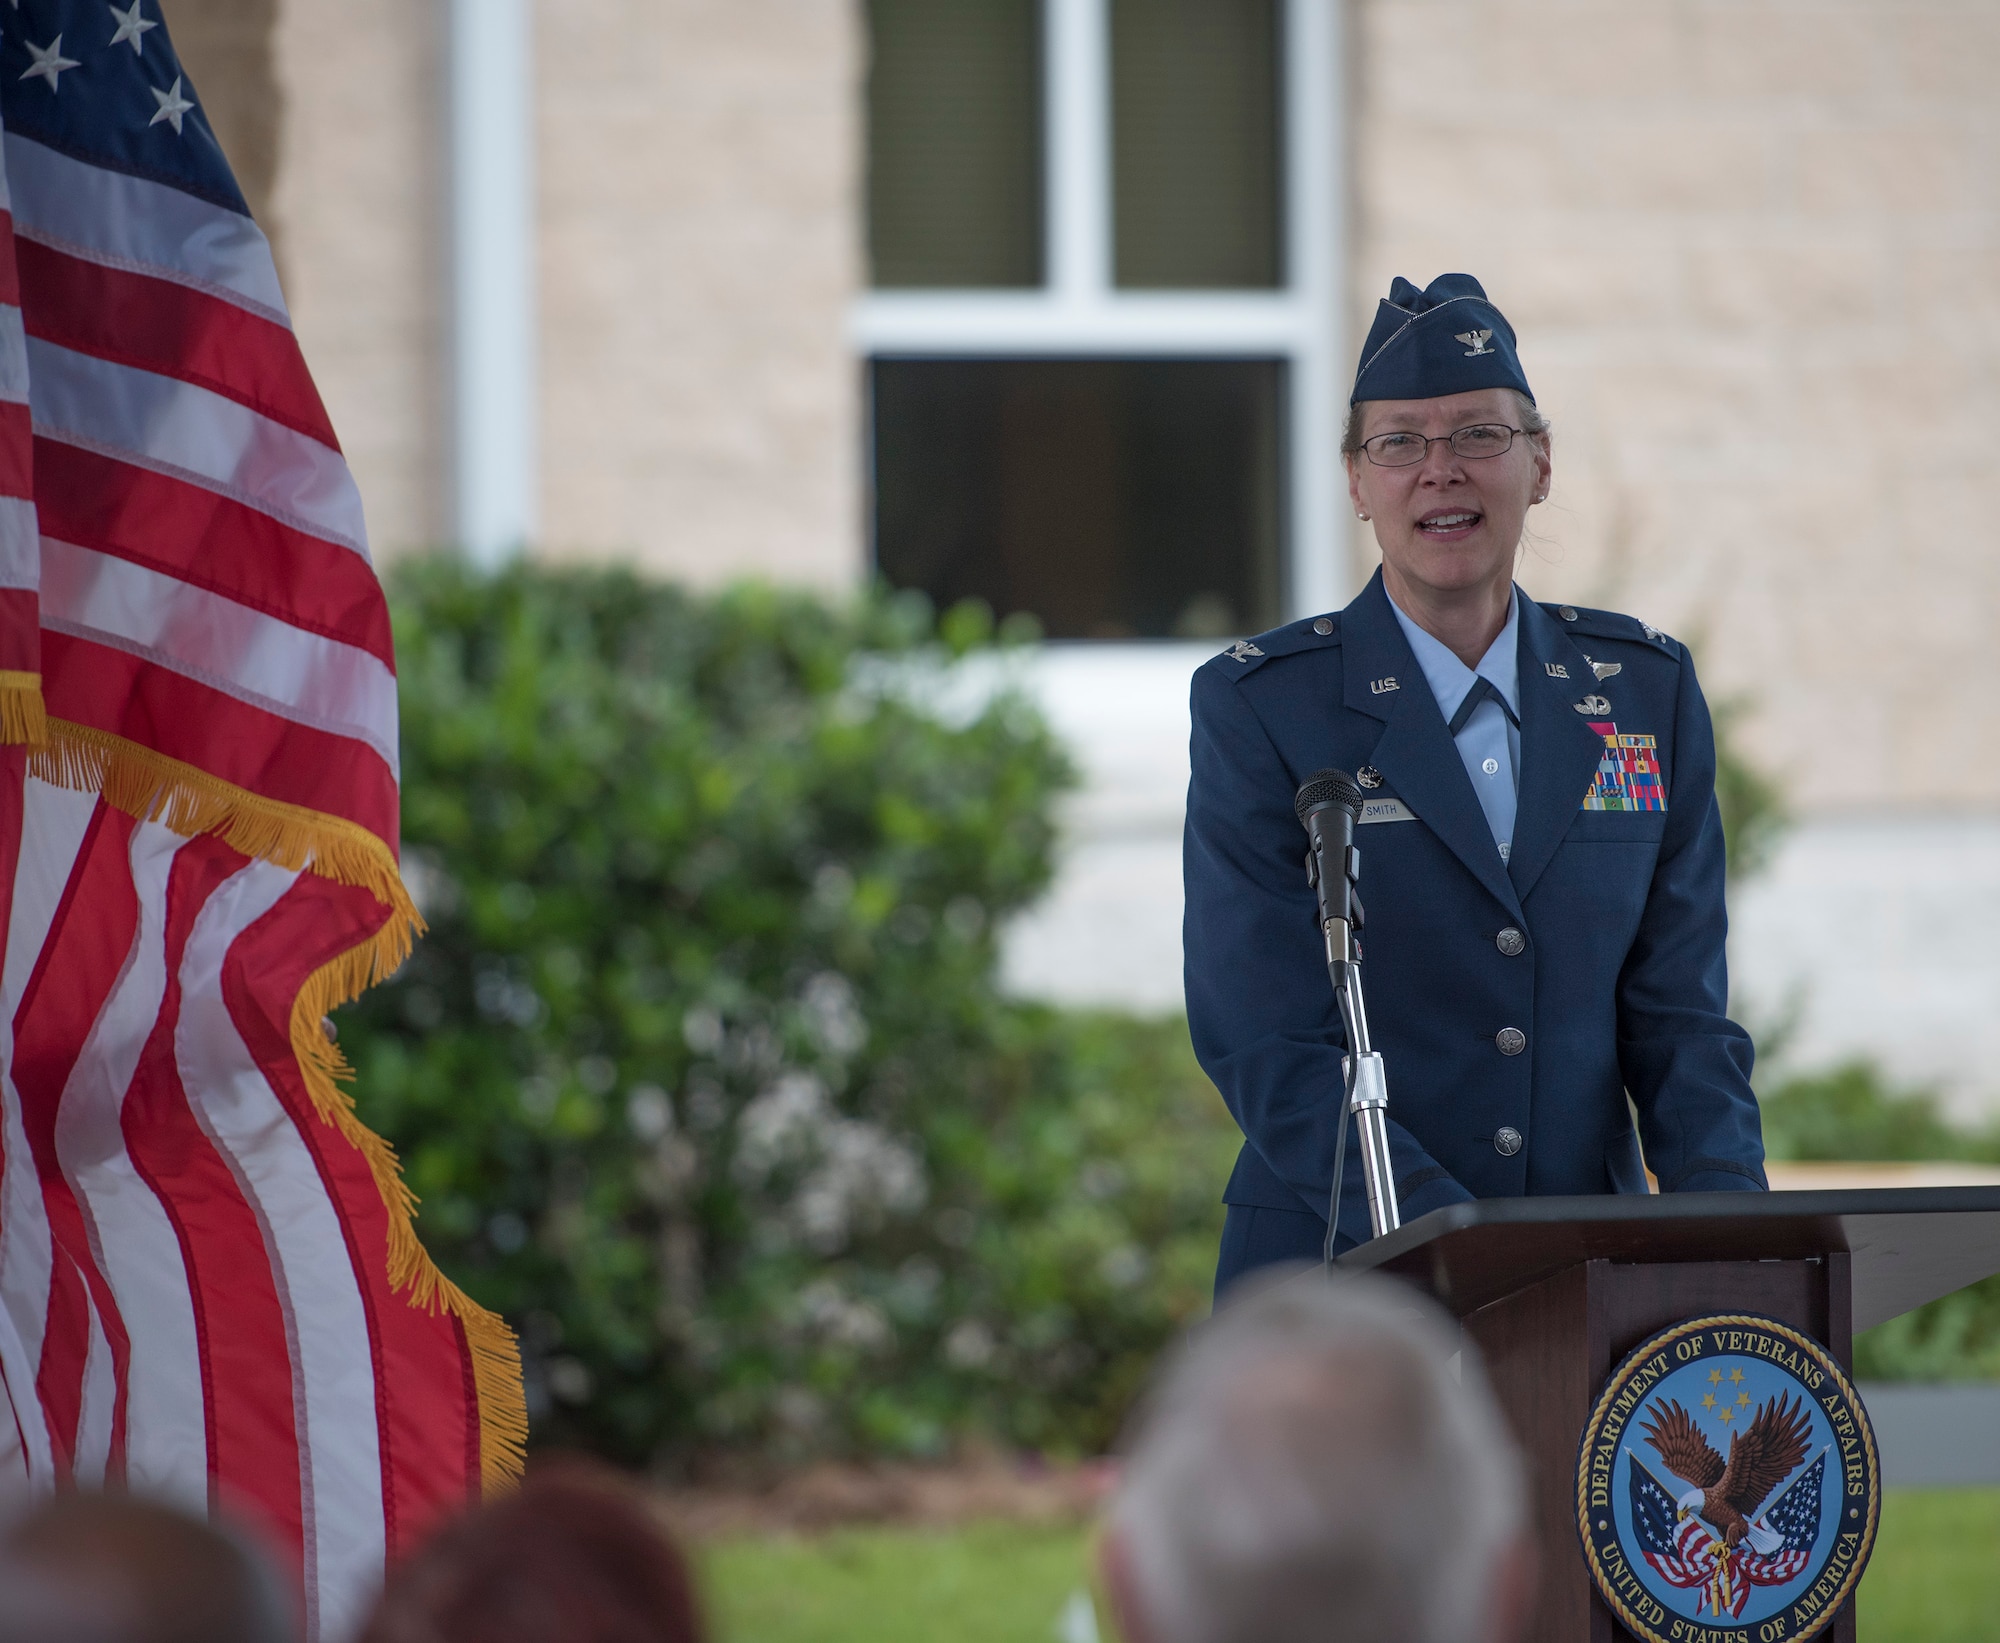 Col. Pamela Smith, 96th Medical Group commander, addresses attendees during the Veterans Affairs Clinic's ribbon-cutting ceremony April 26 at Eglin Air Force Base, Fla.